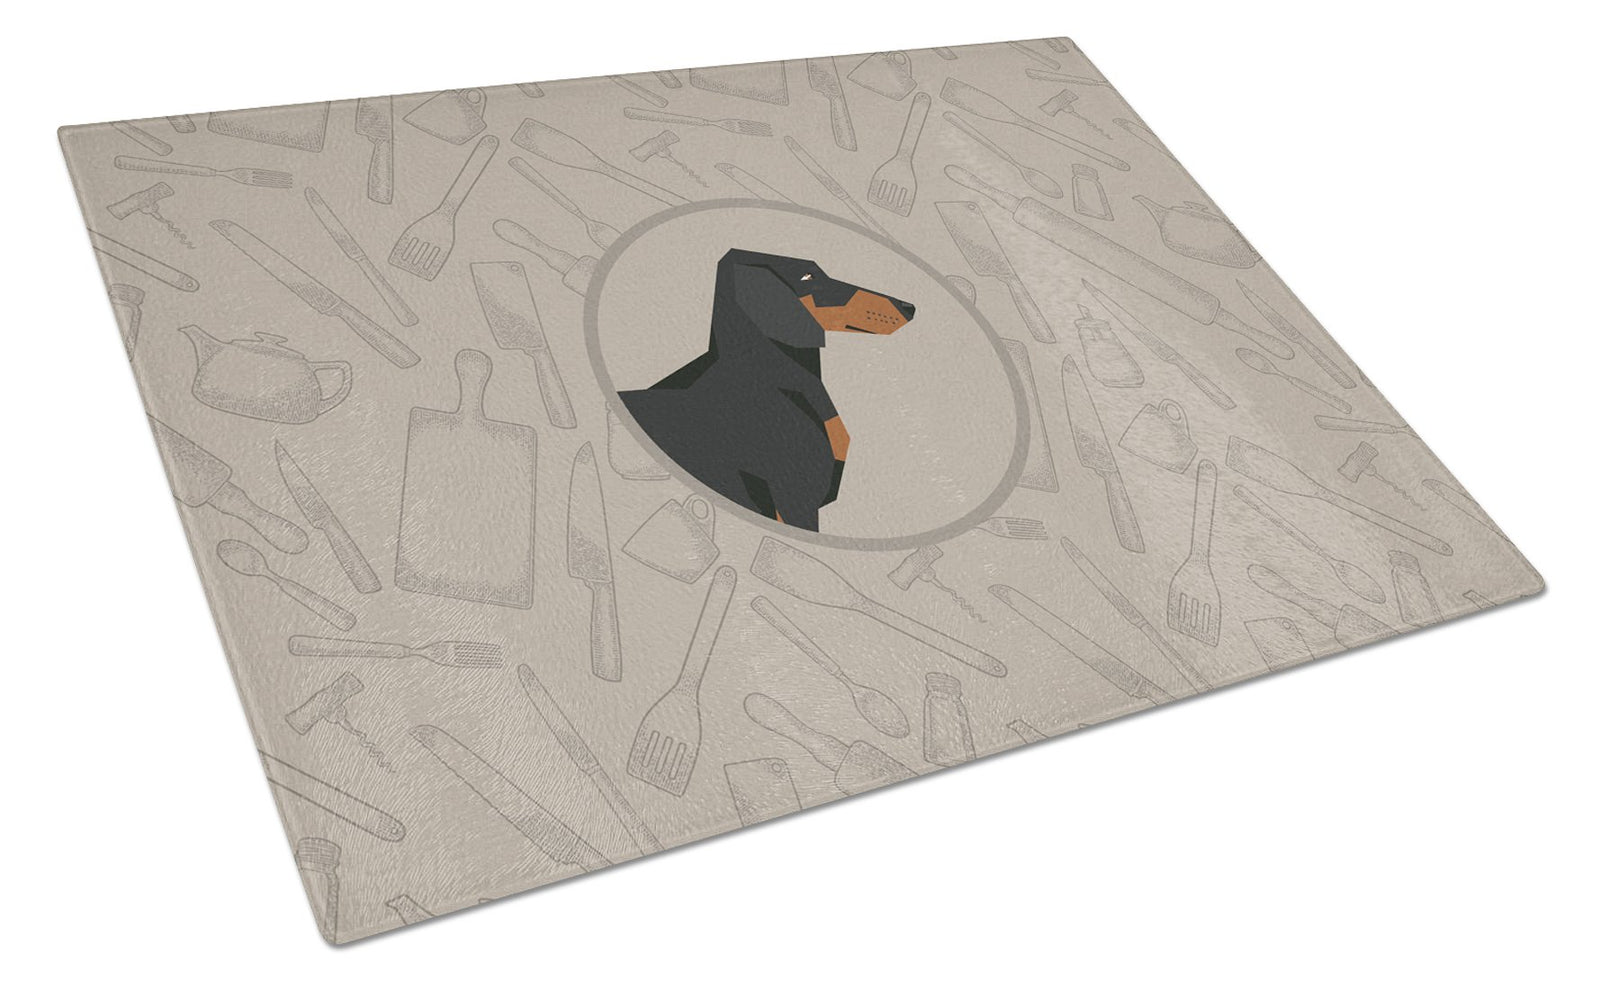 Dachshund In the Kitchen Glass Cutting Board Large CK2180LCB by Caroline's Treasures